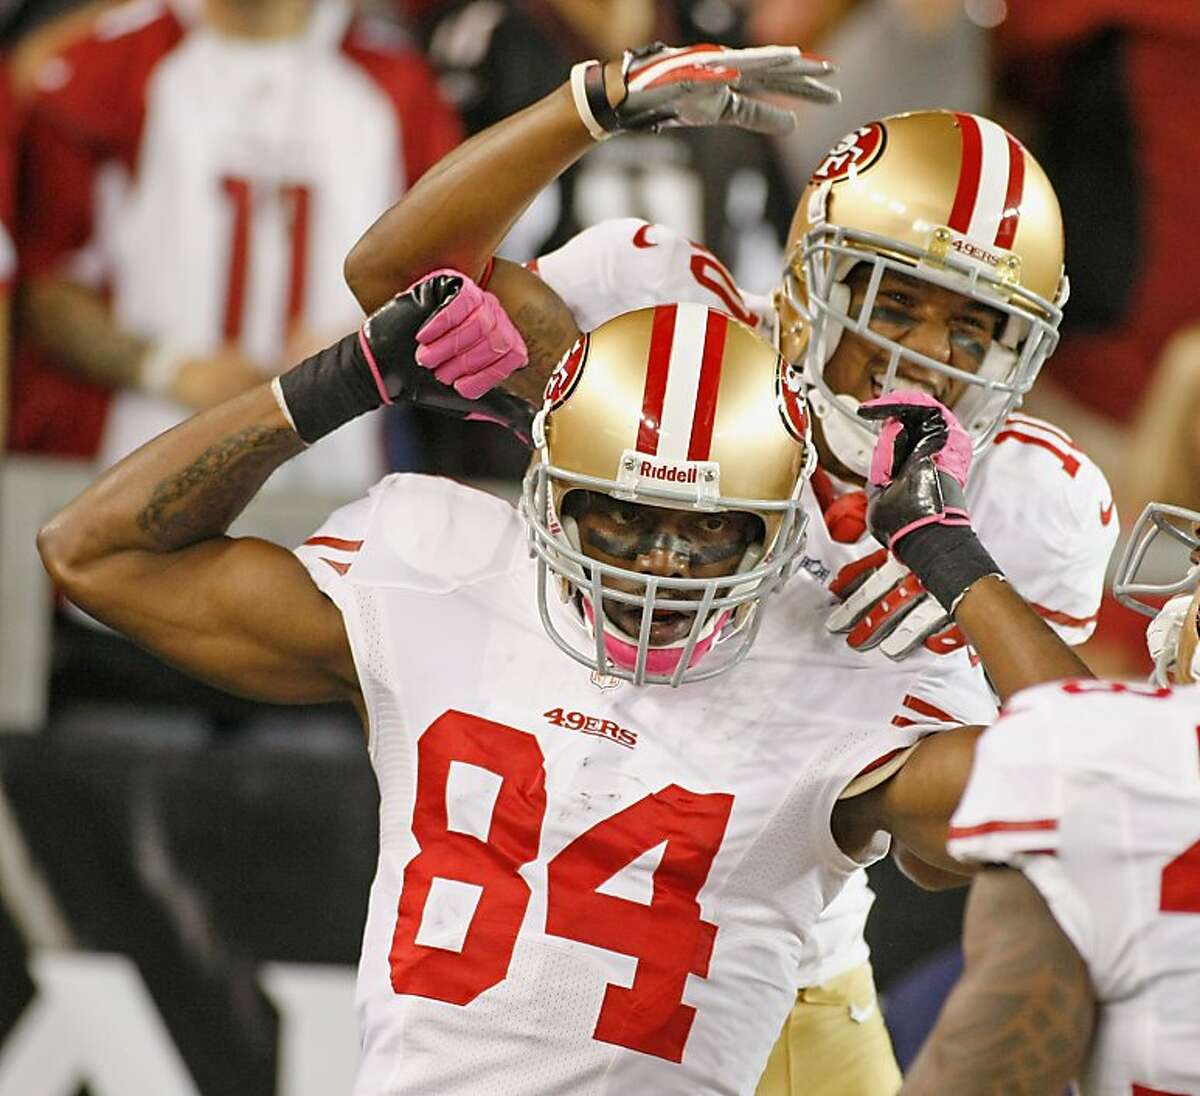 GLENDALE, AZ - OCTOBER 29: Randy Moss #84 of the San Francisco 49ers celebrates with teammate Kyle Williams #10 after his touchdown catch against the Arizona Cardinals during the third quarter of an NFL game at University of Phoenix Stadium on October 29, 2012 in Glendale, Arizona. (Photo by Ralph Freso/Getty Images)